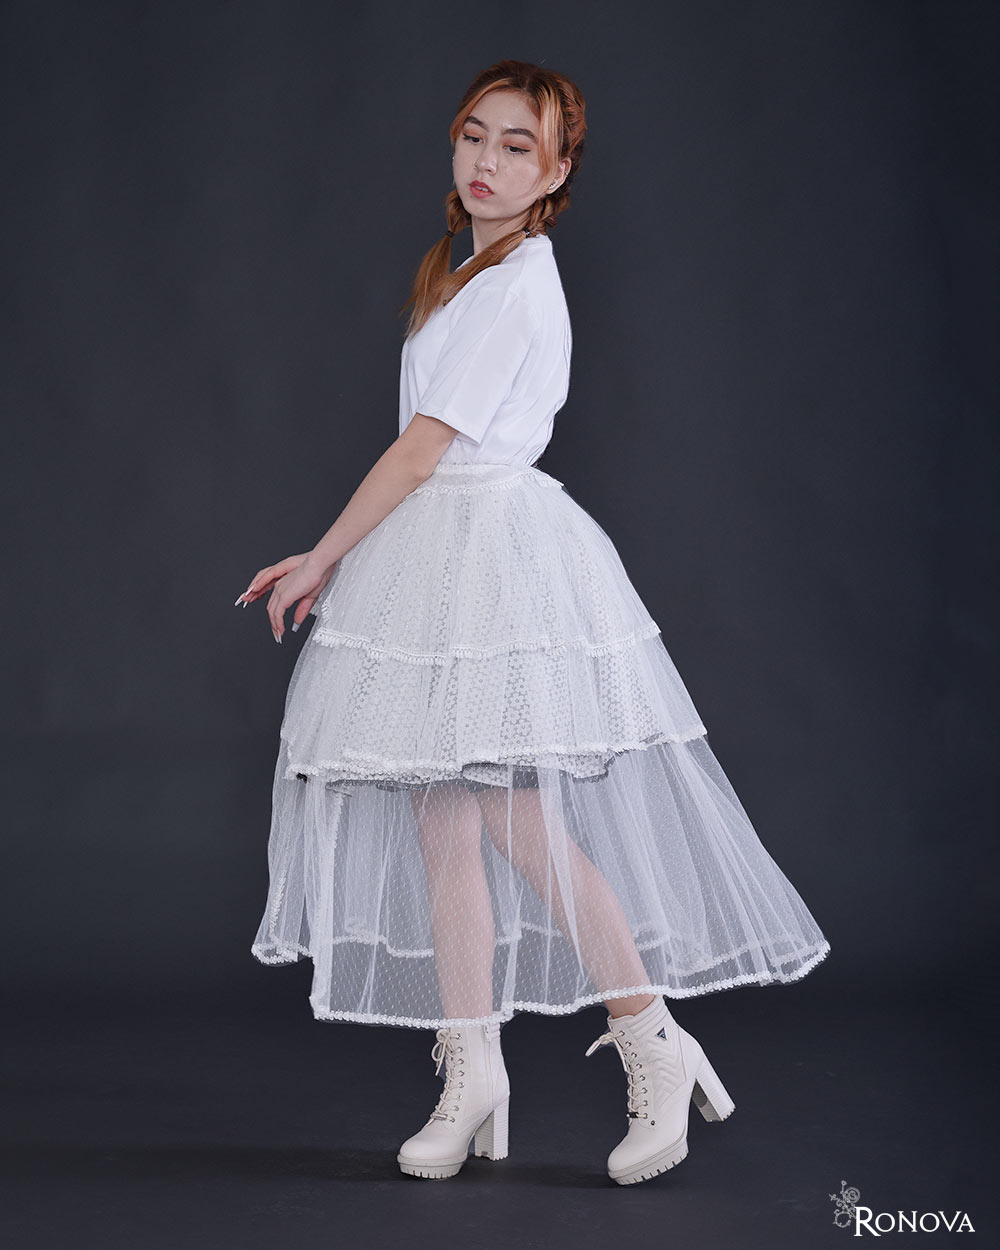 White Ronova Overskirt with Lace Trim and Silver Accents